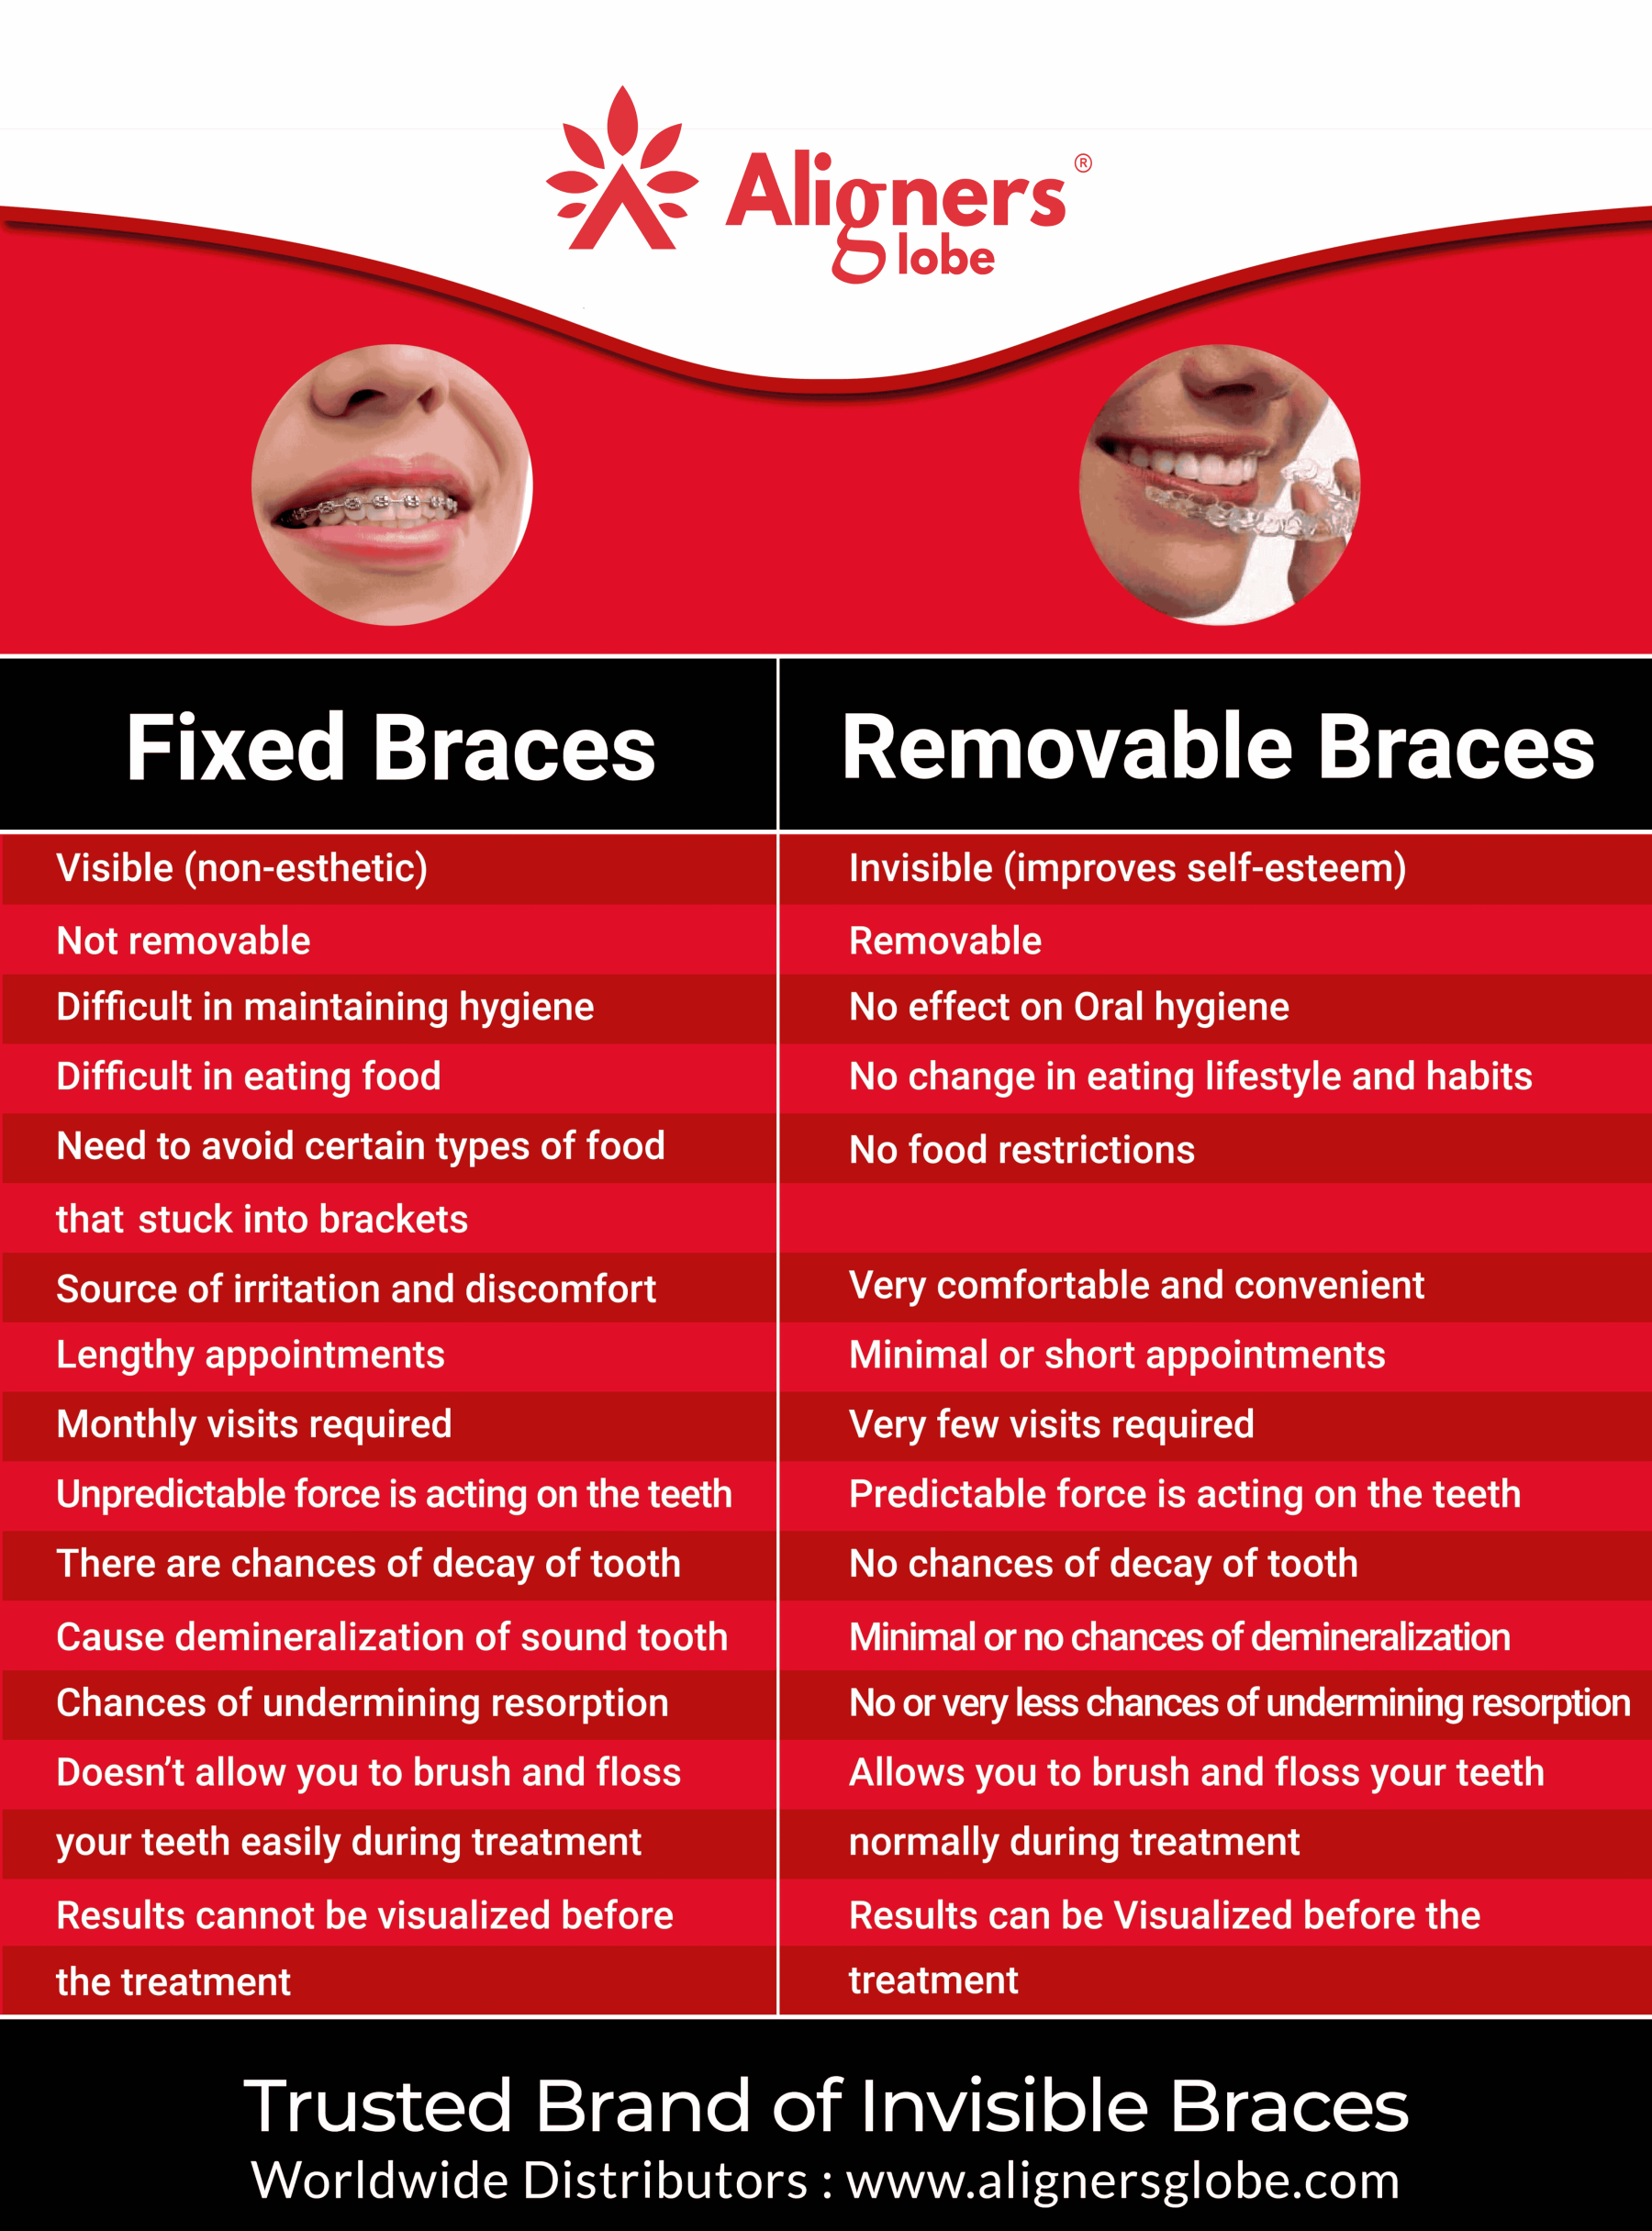 Comparison between Fixed Braces and Removable Braces